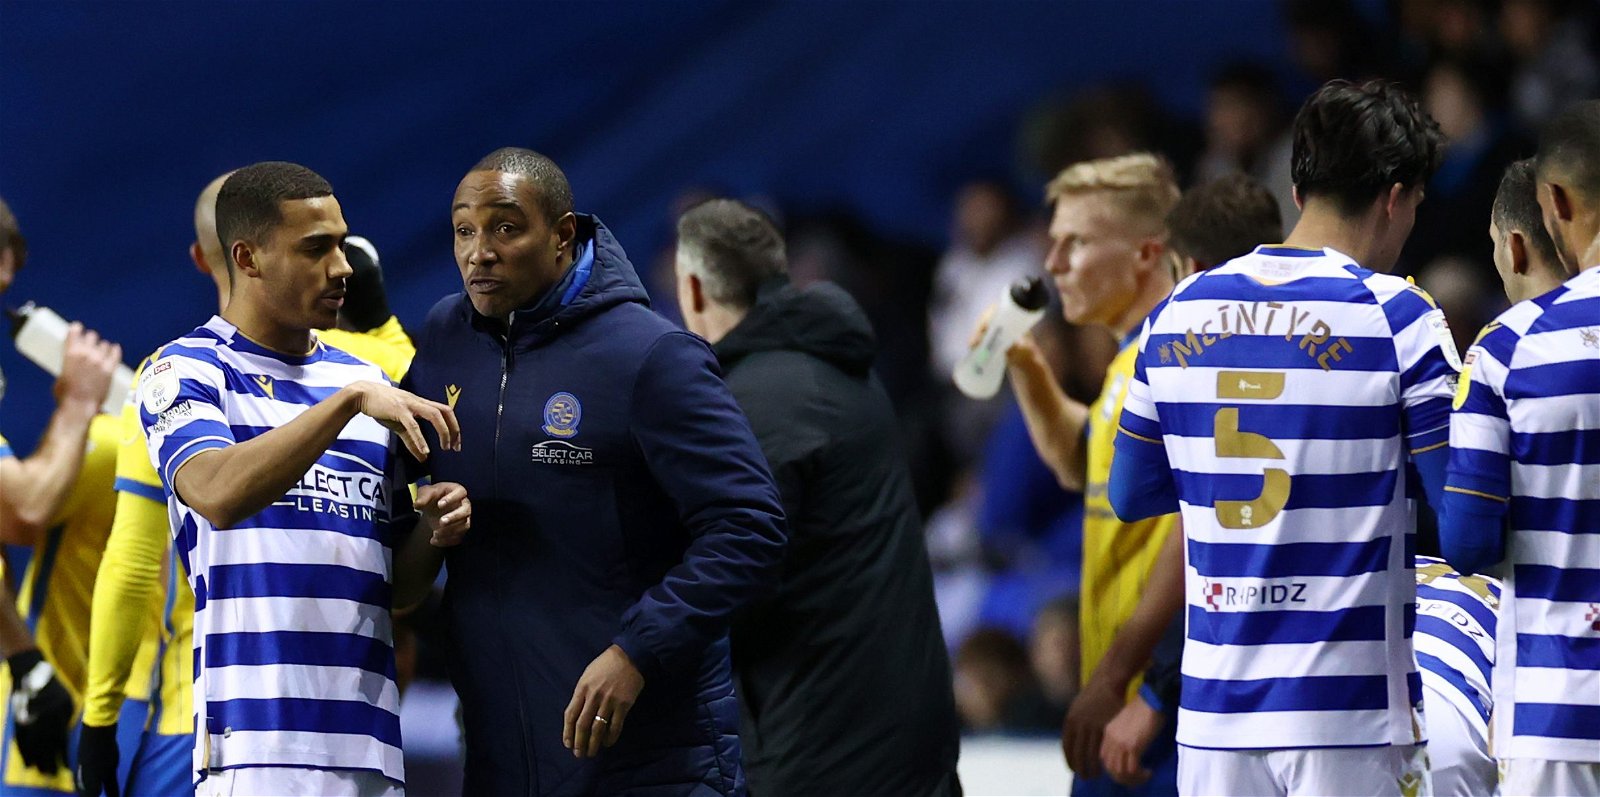 Reading, 3 Reading players who impressed in the 4-4 comeback draw v Swansea City